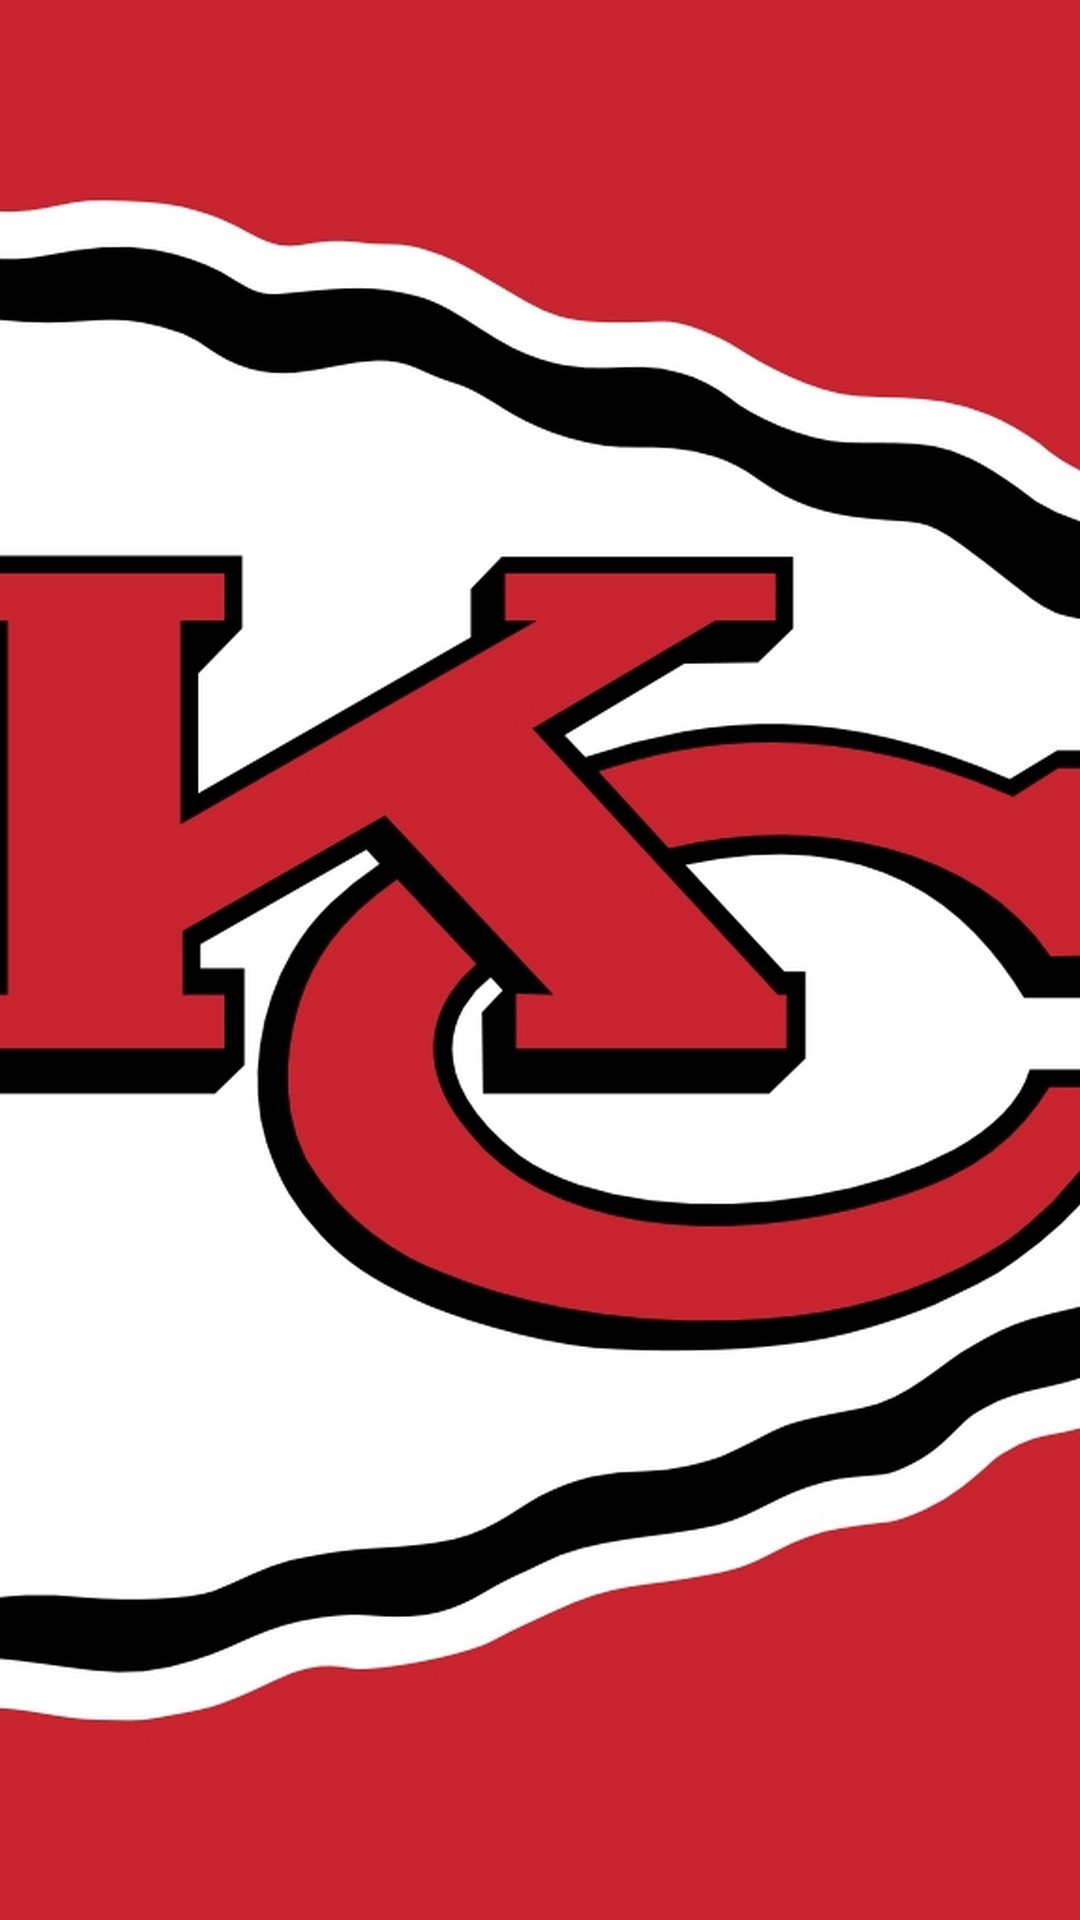 Kansas City Chiefs NFL iPhone Wallpaper HD with high-resolution 1080x1920 pixel. Download and set as wallpaper for Desktop Computer, Apple iPhone X, XS Max, XR, 8, 7, 6, SE, iPad, Android